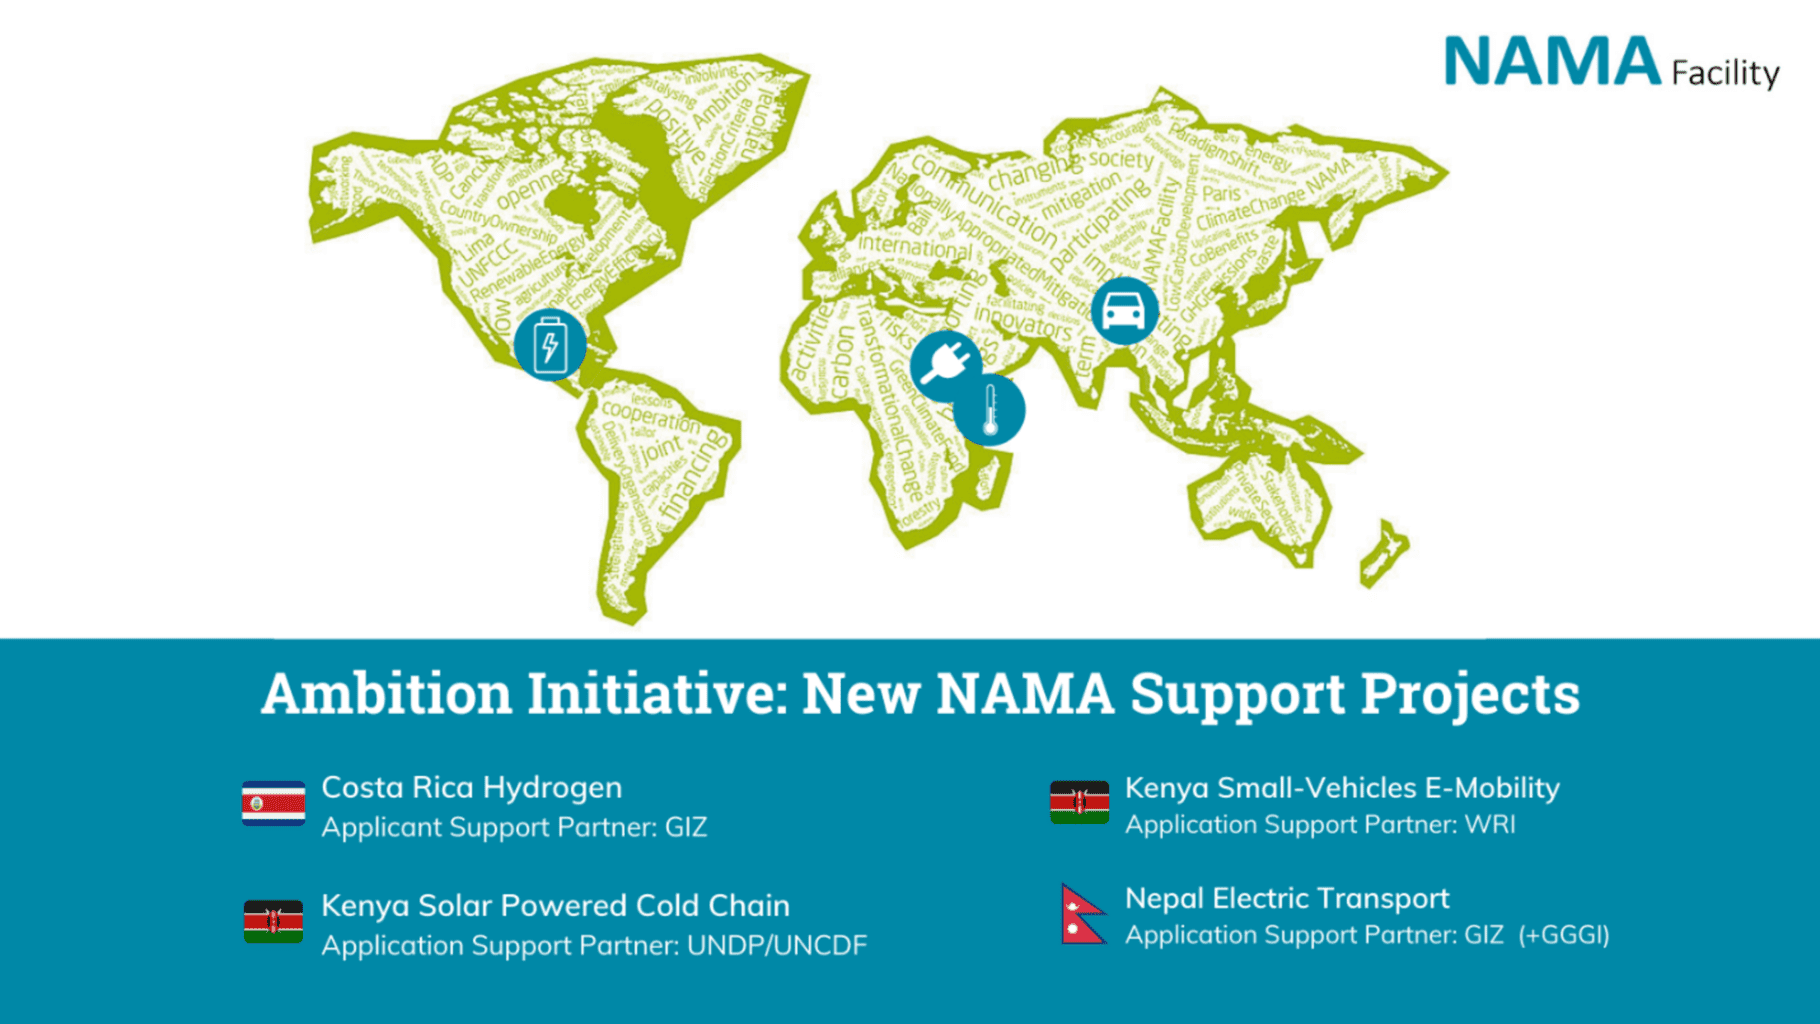 Visiual of locations of new NAMA Support Projects